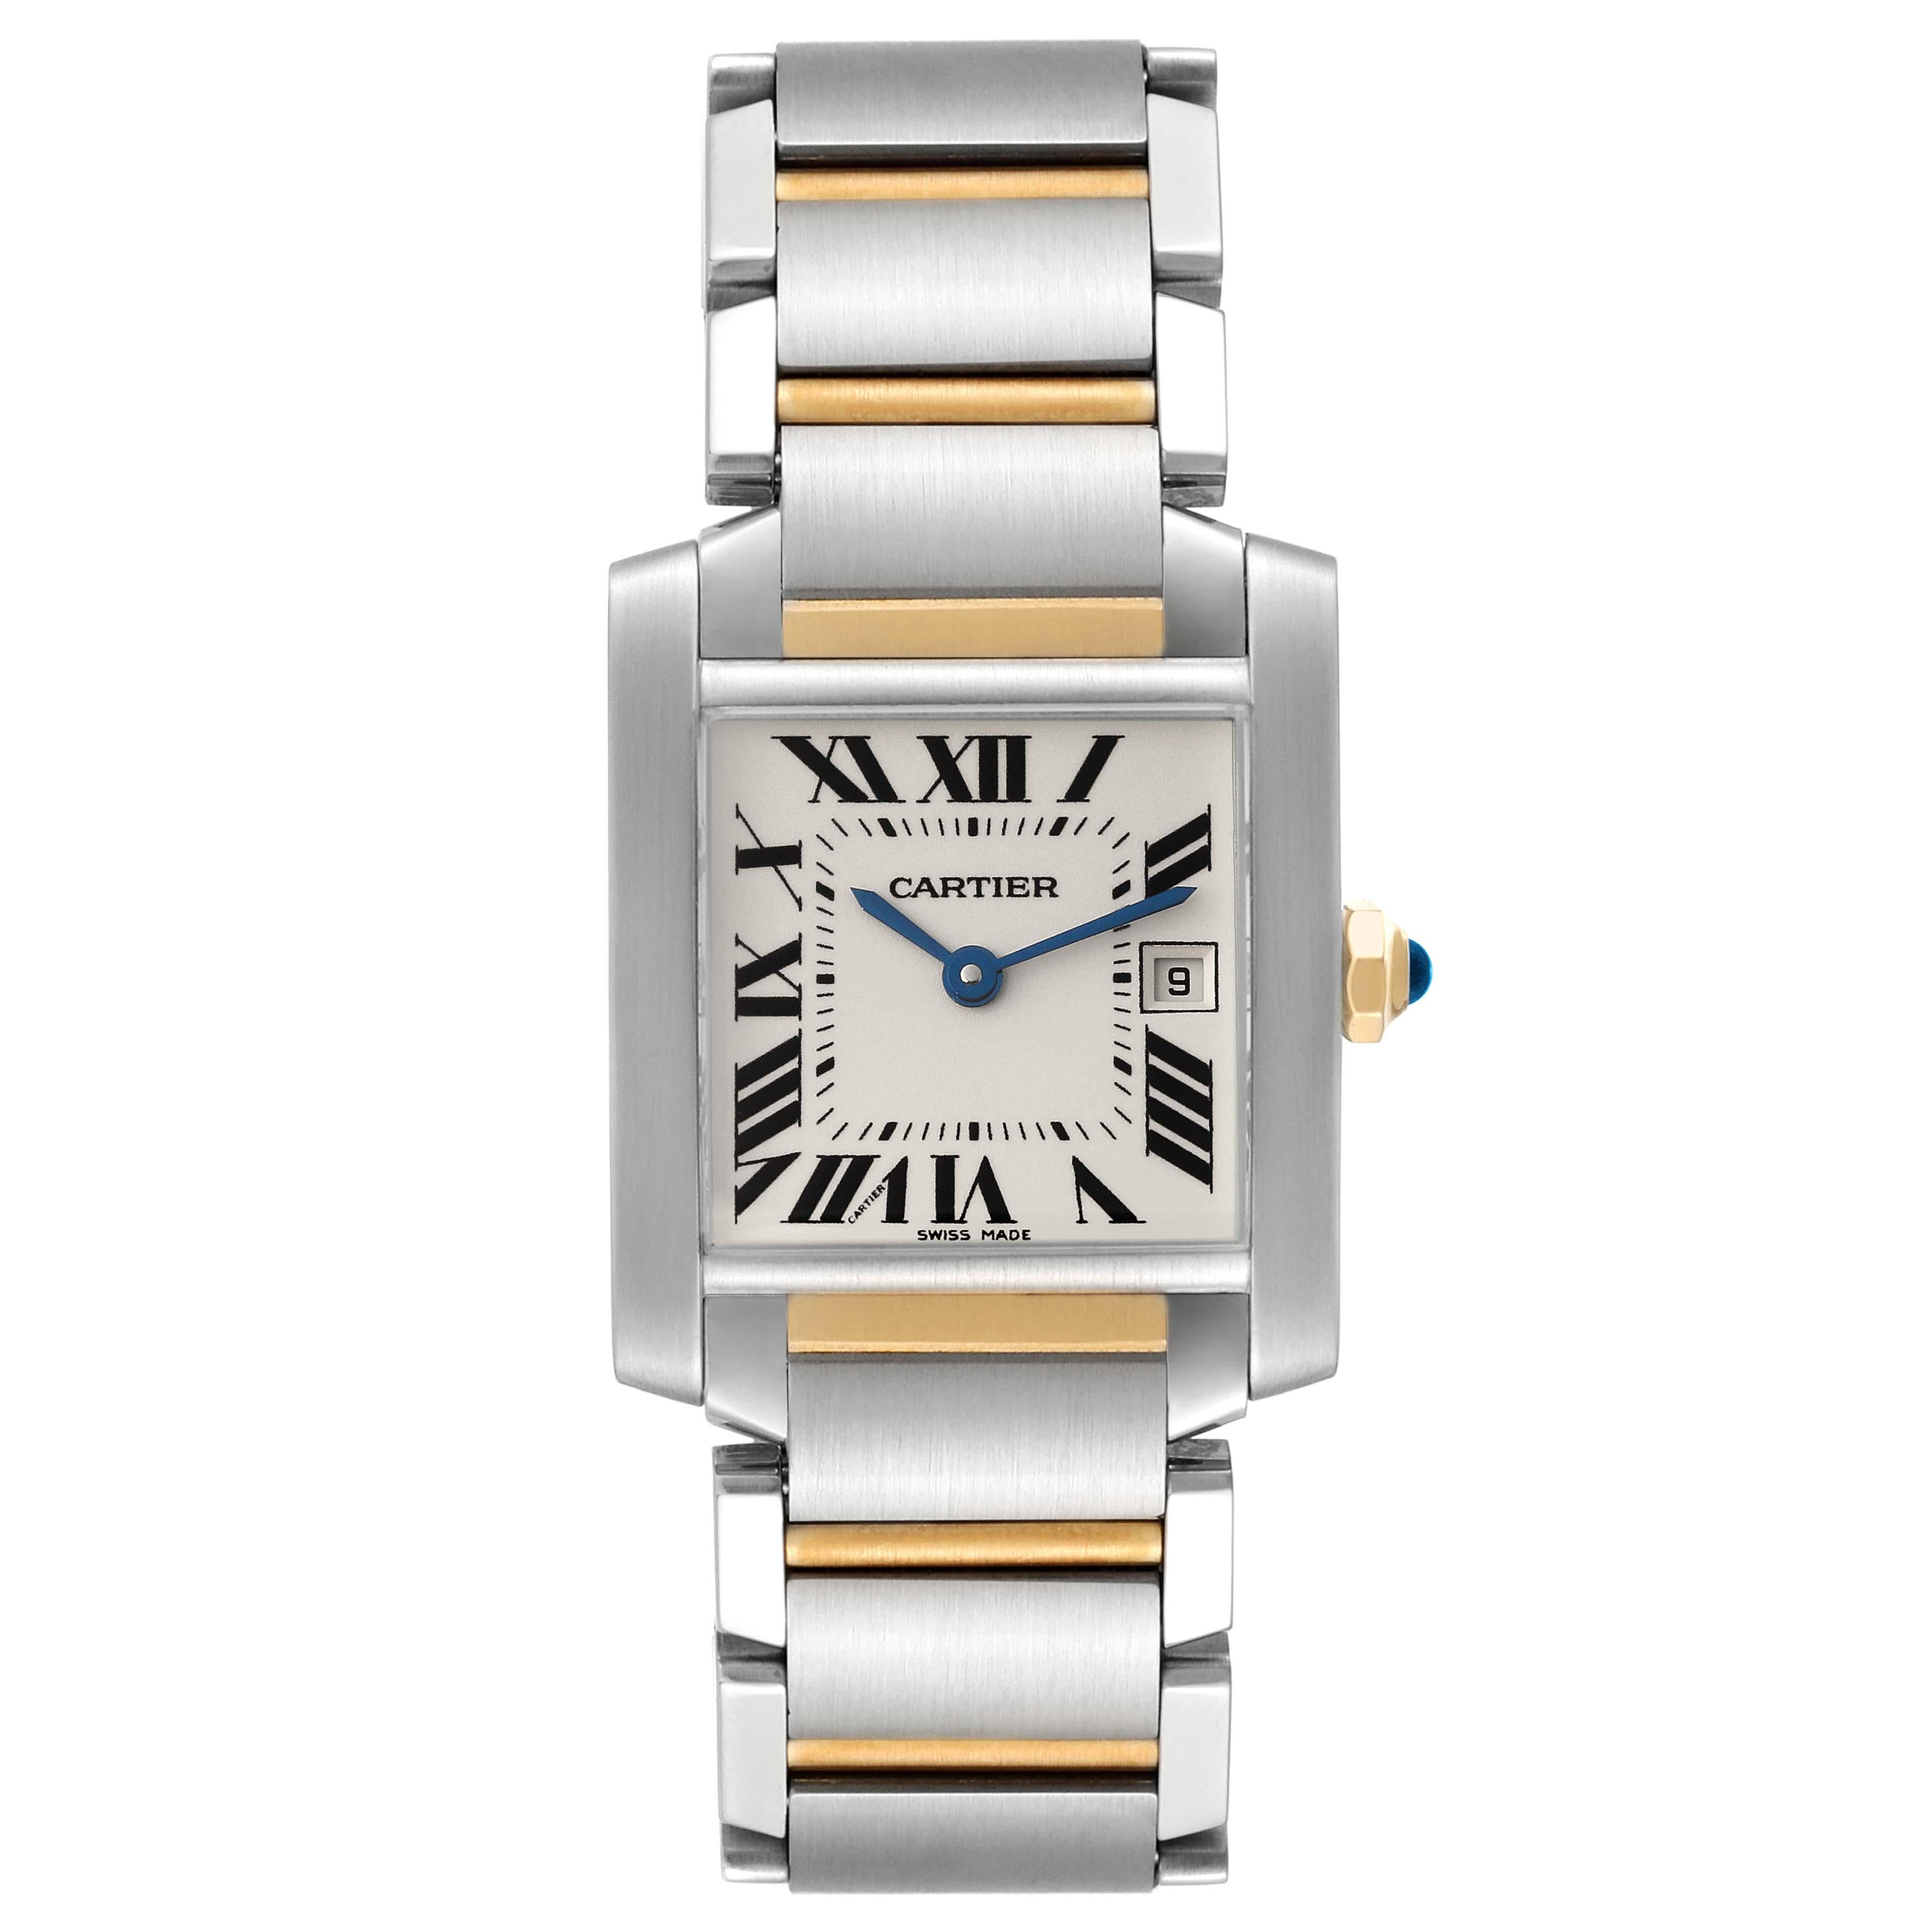 Cartier Tank Francaise Midsize Steel Yellow Gold Ladies Watch W51012Q4 Papers. Quartz movement. Rectangular stainless steel 25.0 x 30.0 mm case. Octagonal 18k yellow gold crown set with a blue spinel cabochon. . Scratch resistant sapphire crystal.